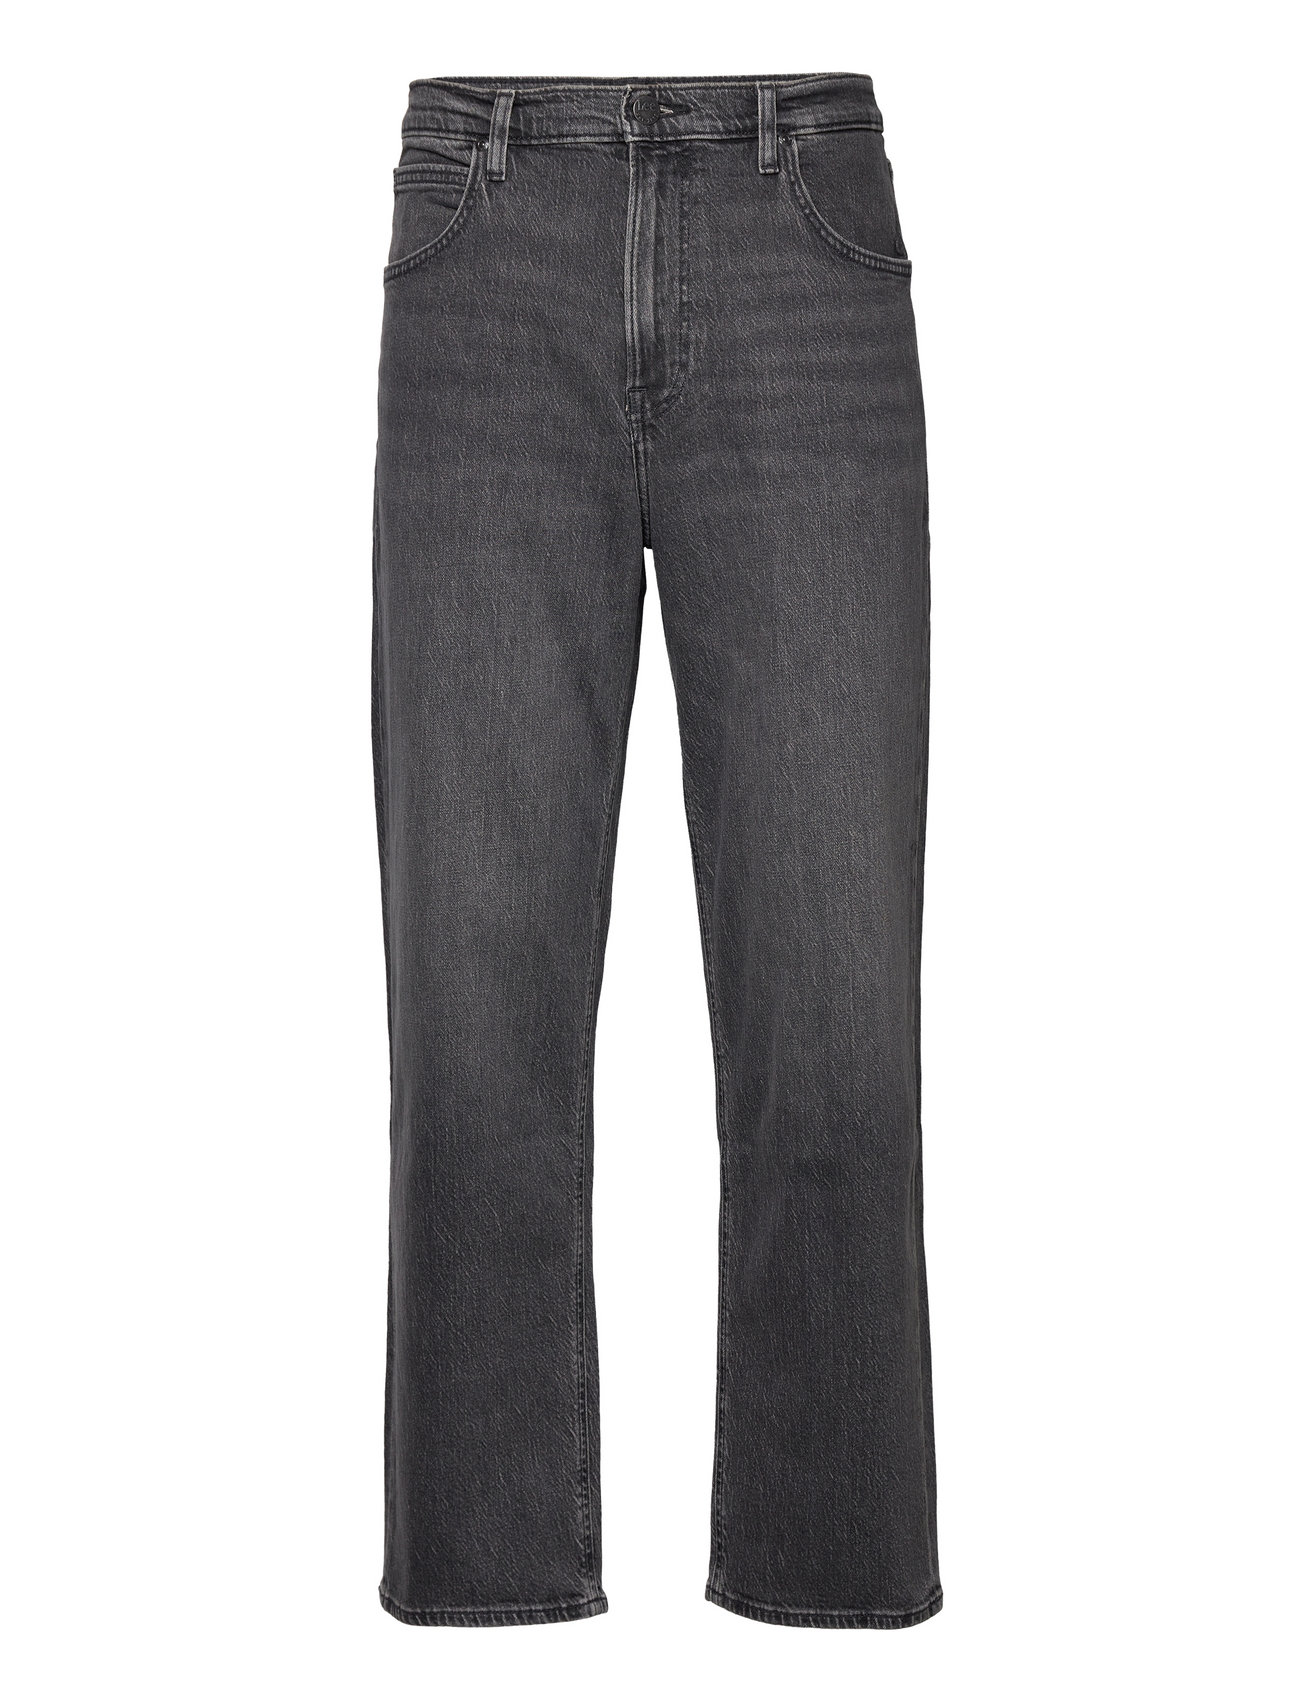 Lee Jeans Asher - Relaxed jeans | Boozt.com